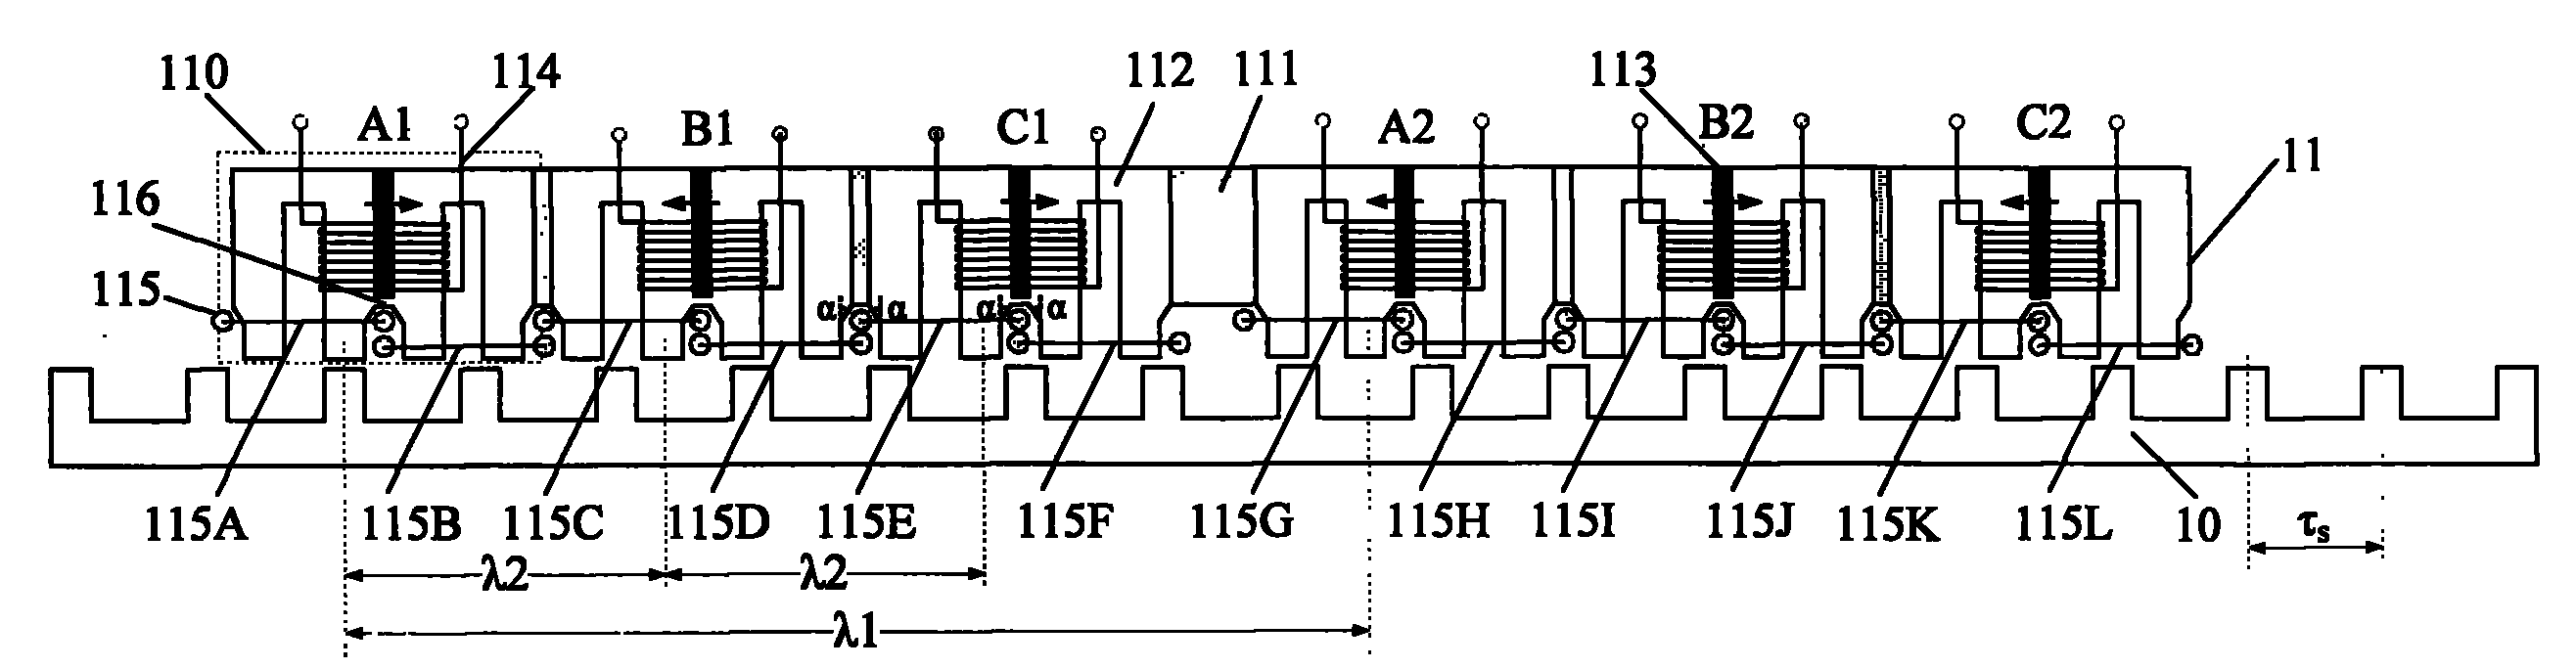 Complementary modular hybrid excited linear motor